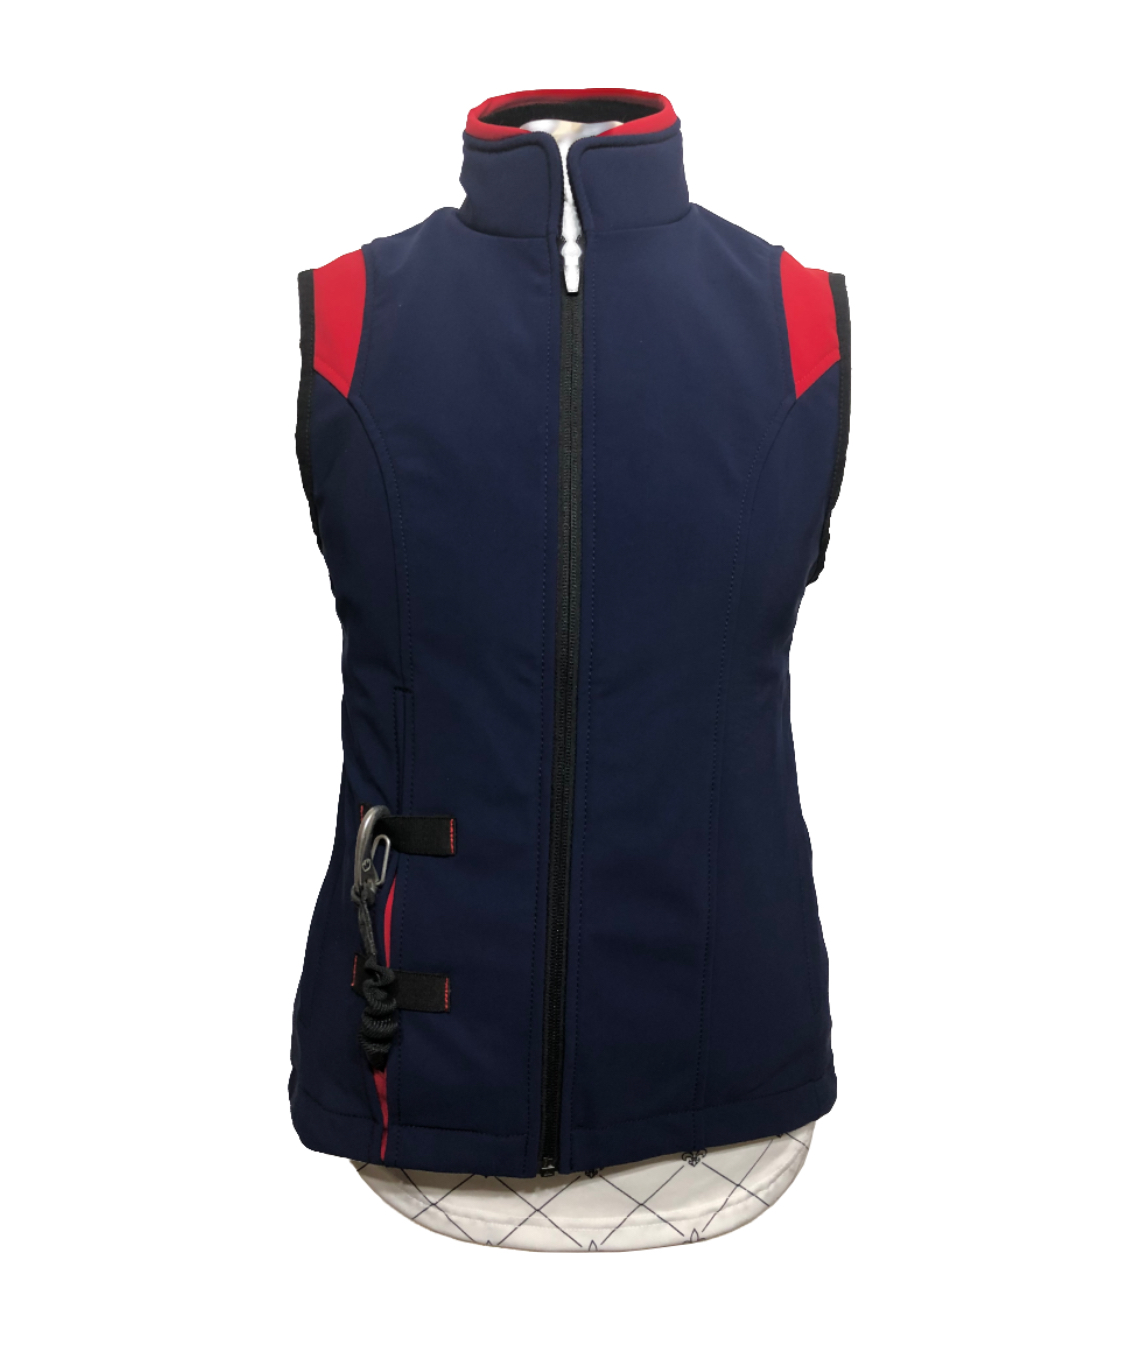 Refurbished Zip In 1 With Airshell vest outer in blue and red small front